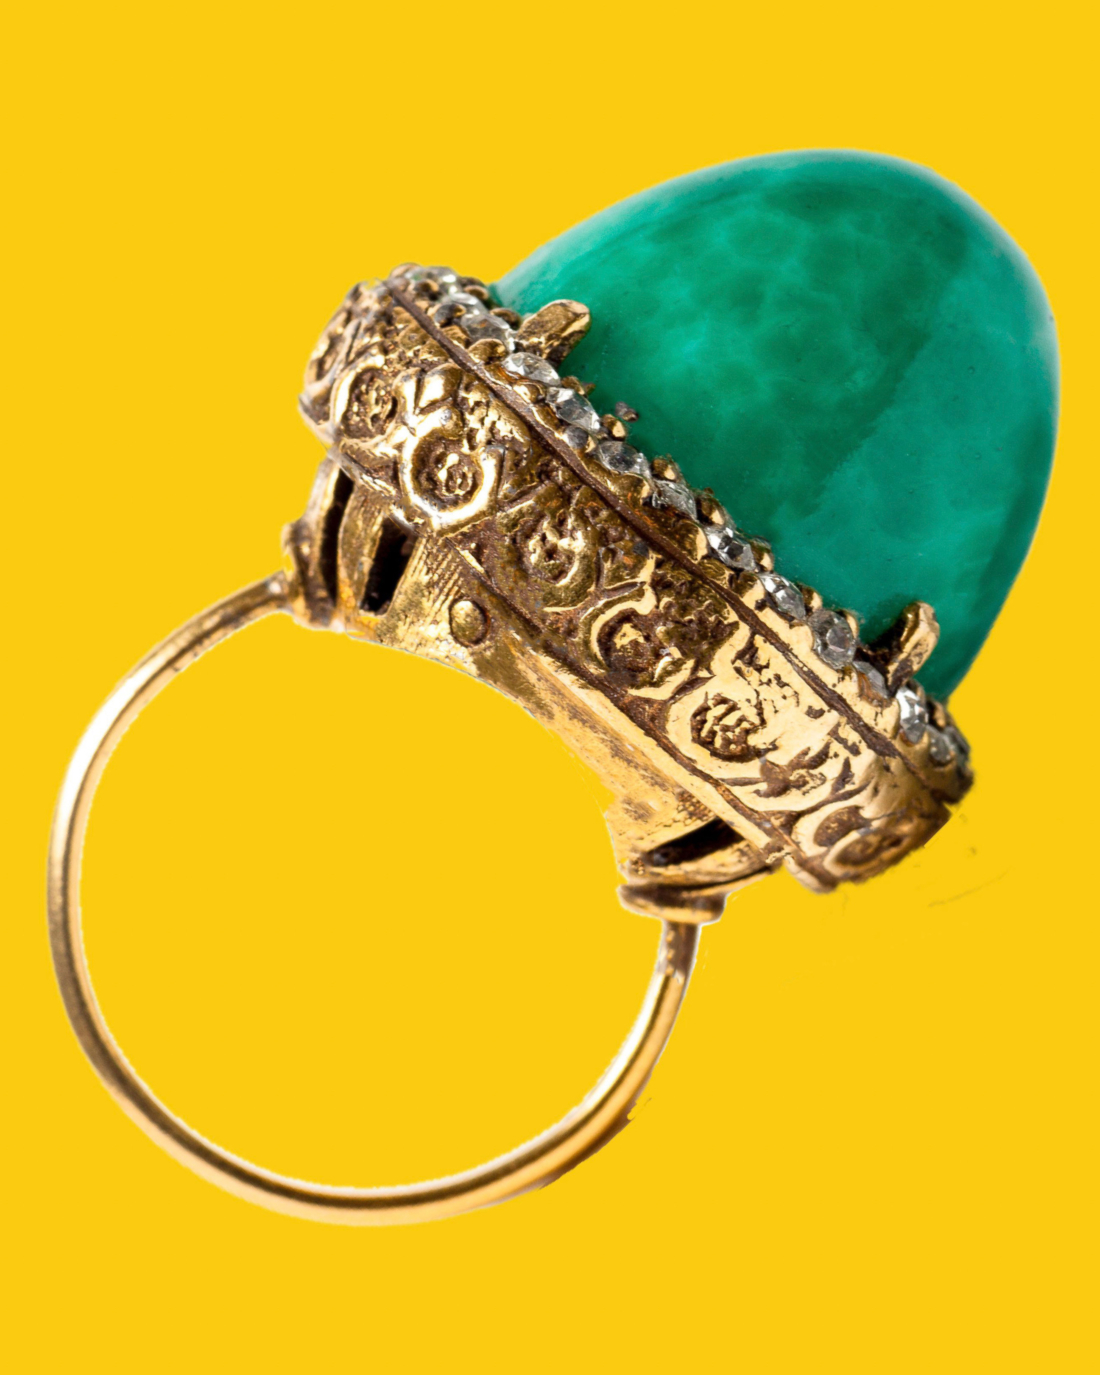 Opulent Green Peking Glass Domed Cocktail Ring, circa 1960's